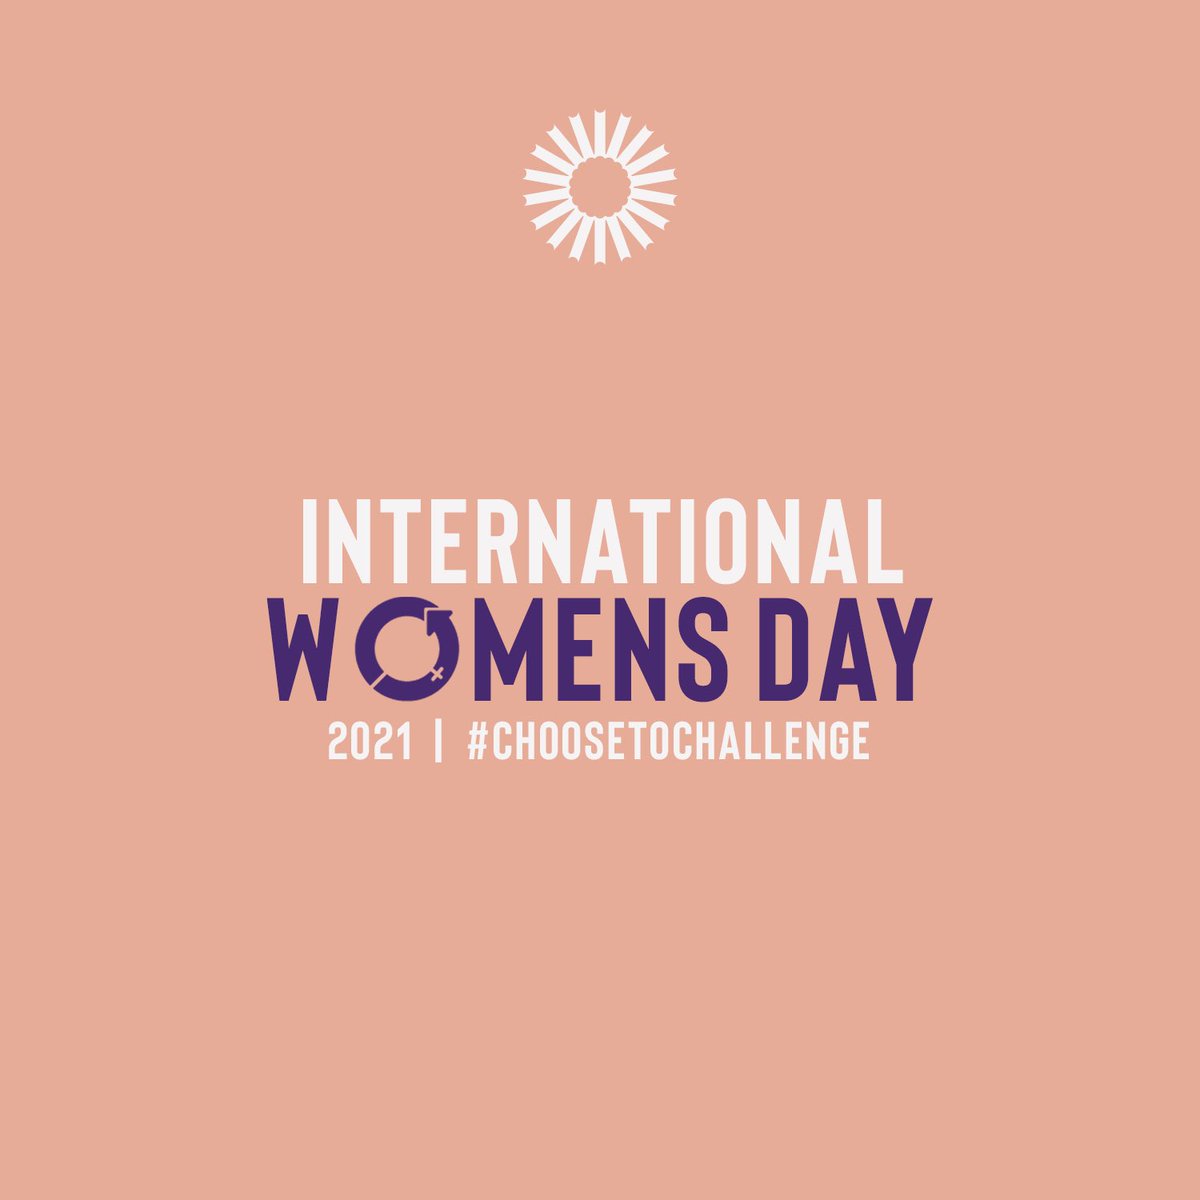 For #InternationalWomensDay, we celebrate women around the world who #ChoosetoChallenge & fight for gender equity. Head to our IG Story for a takeover by Wonder Grant Recipient @chmba_ to hear about @tiwalecbo, the community center she founded to uplift girls & non-binary people.